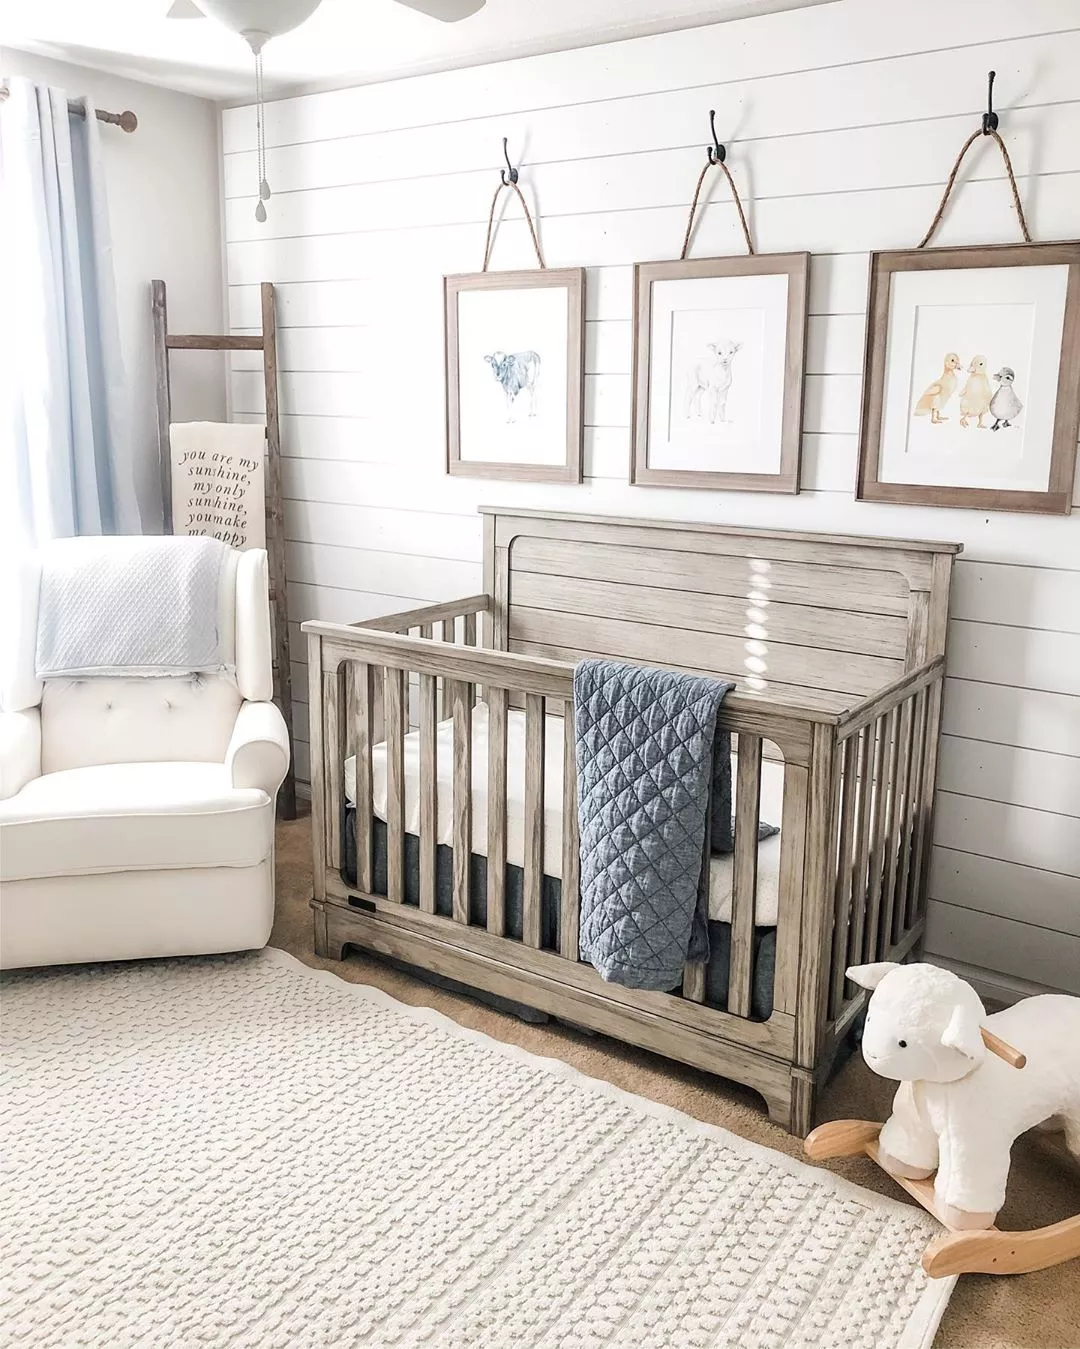 4 Nursery & Baby Room Ideas for Small Homes